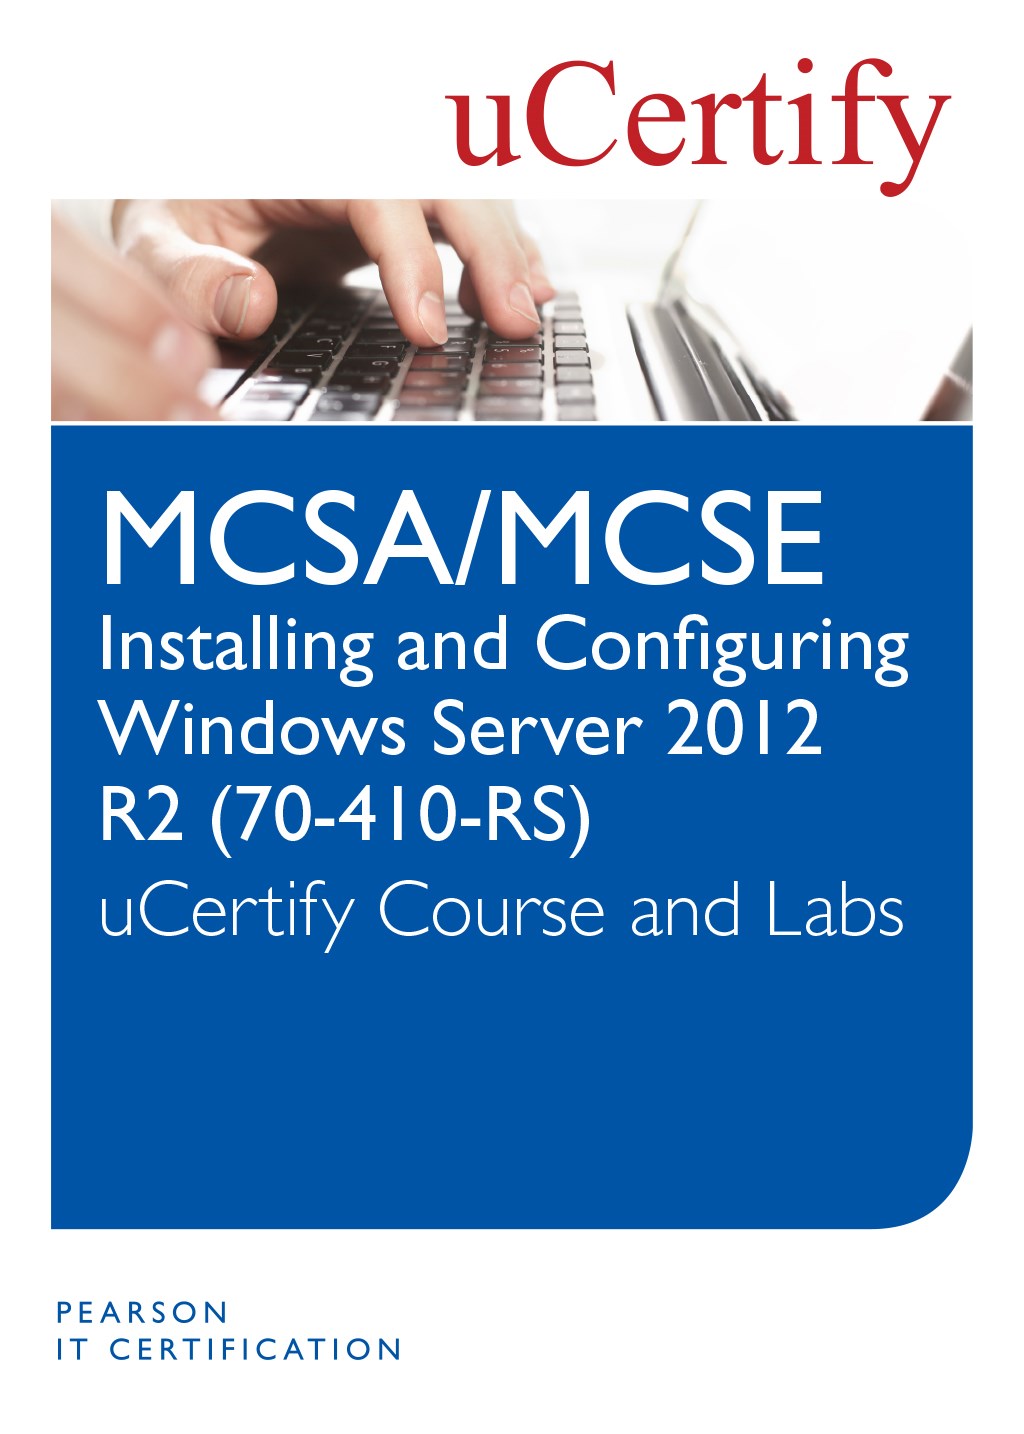 Installing and Configuring Windows Server 2012 R2 (70-410-R2) Course and Lab